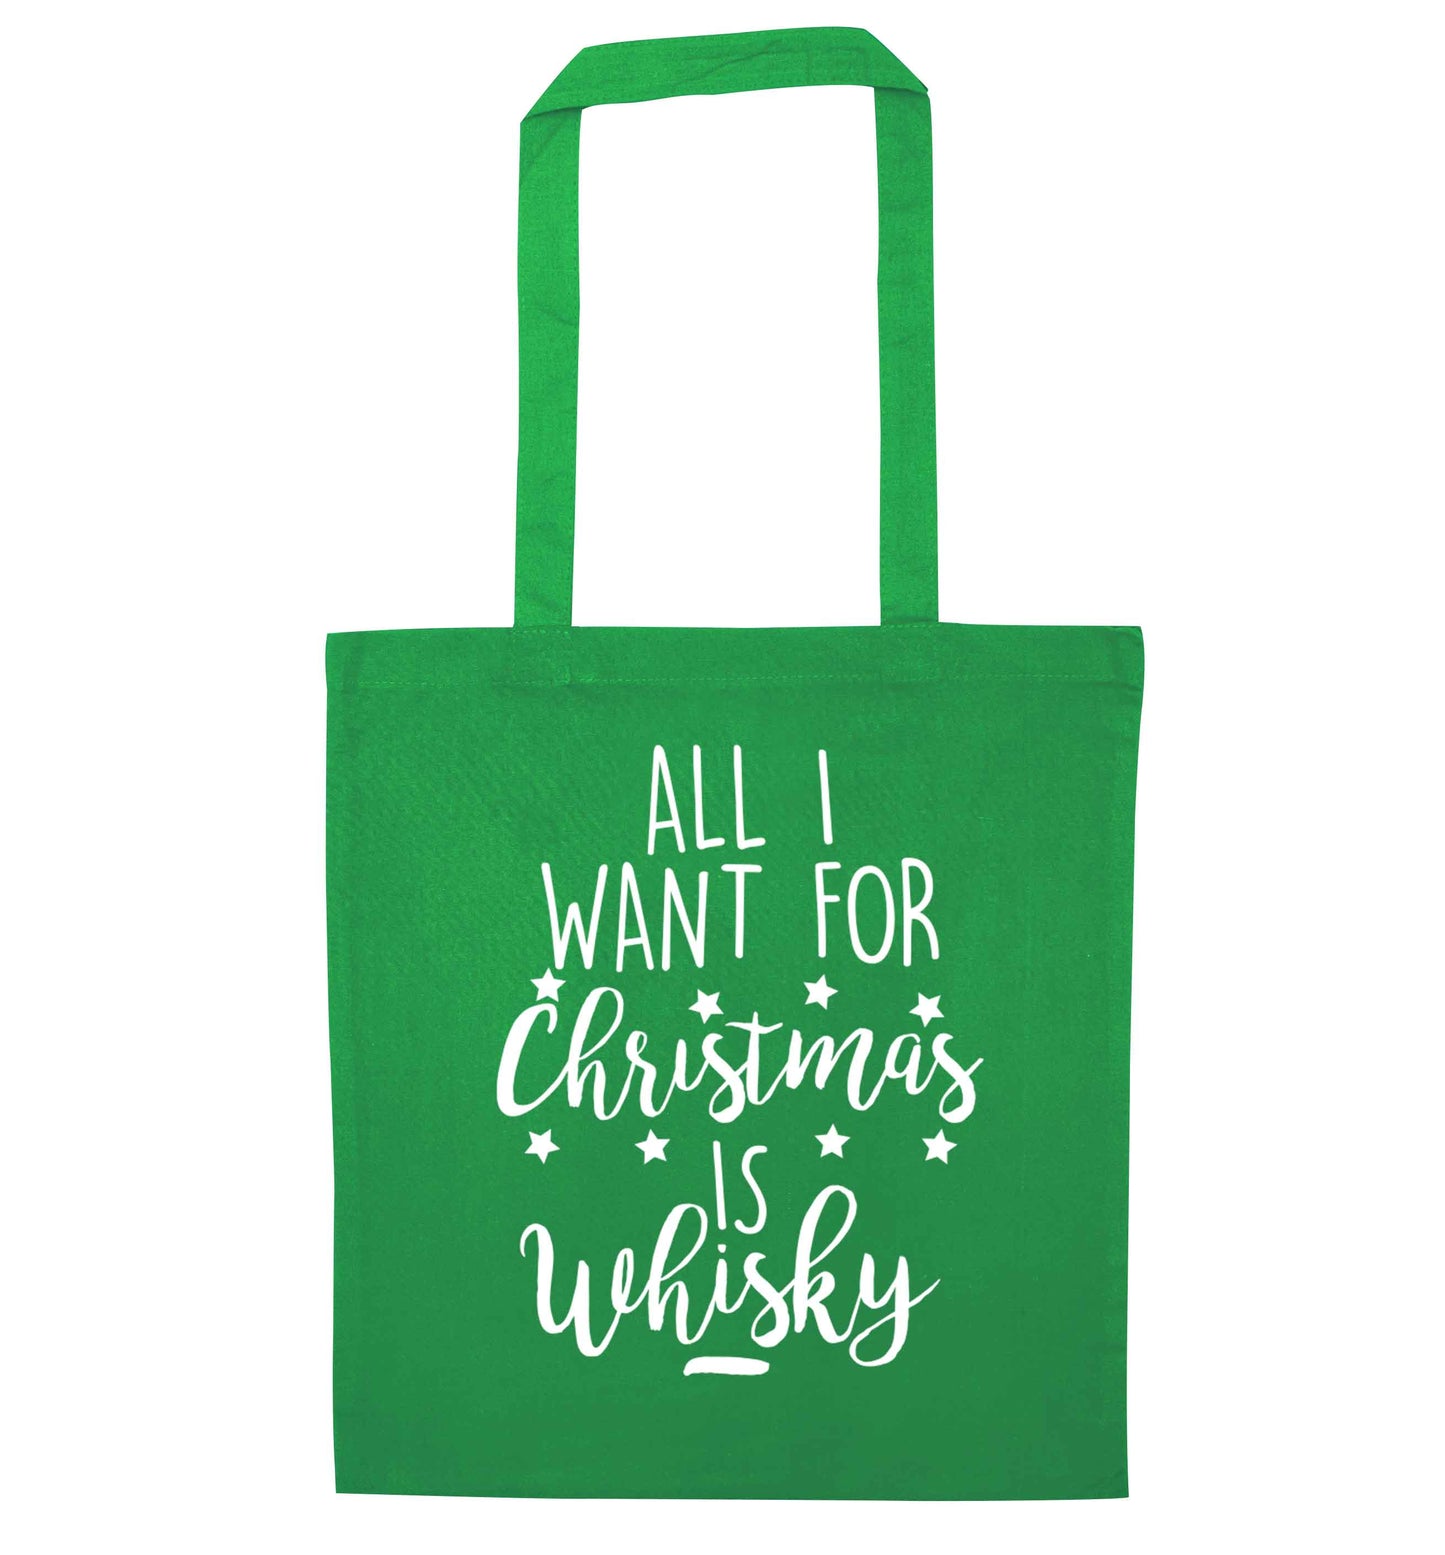 All I want for Christmas is whisky green tote bag